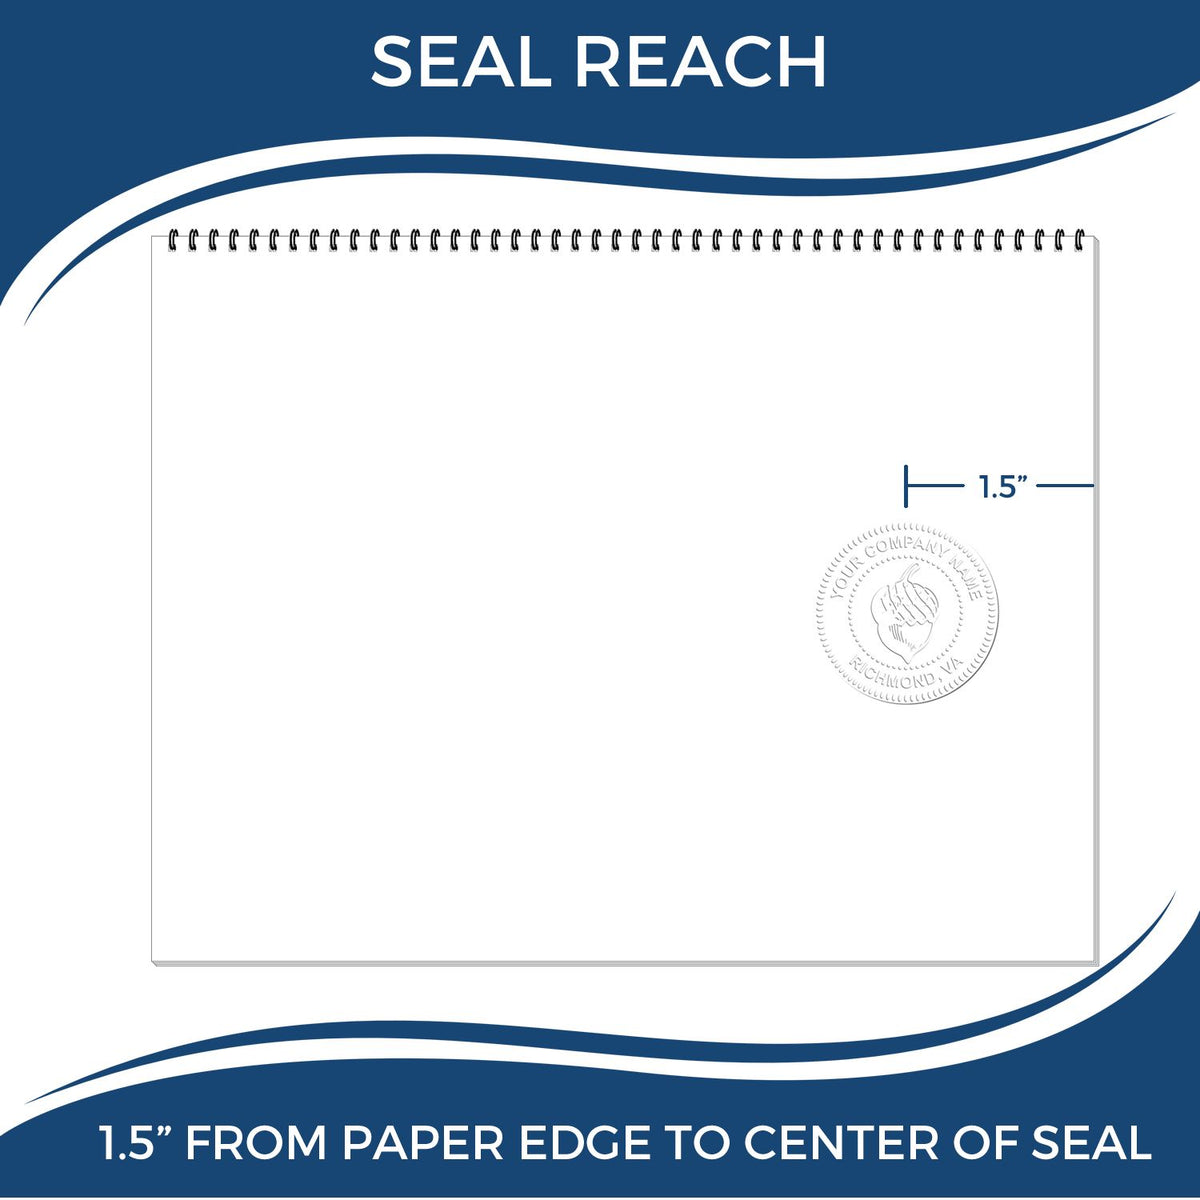 An infographic showing the seal reach which is represented by a ruler and a miniature seal image of the Soft Connecticut Professional Engineer Seal